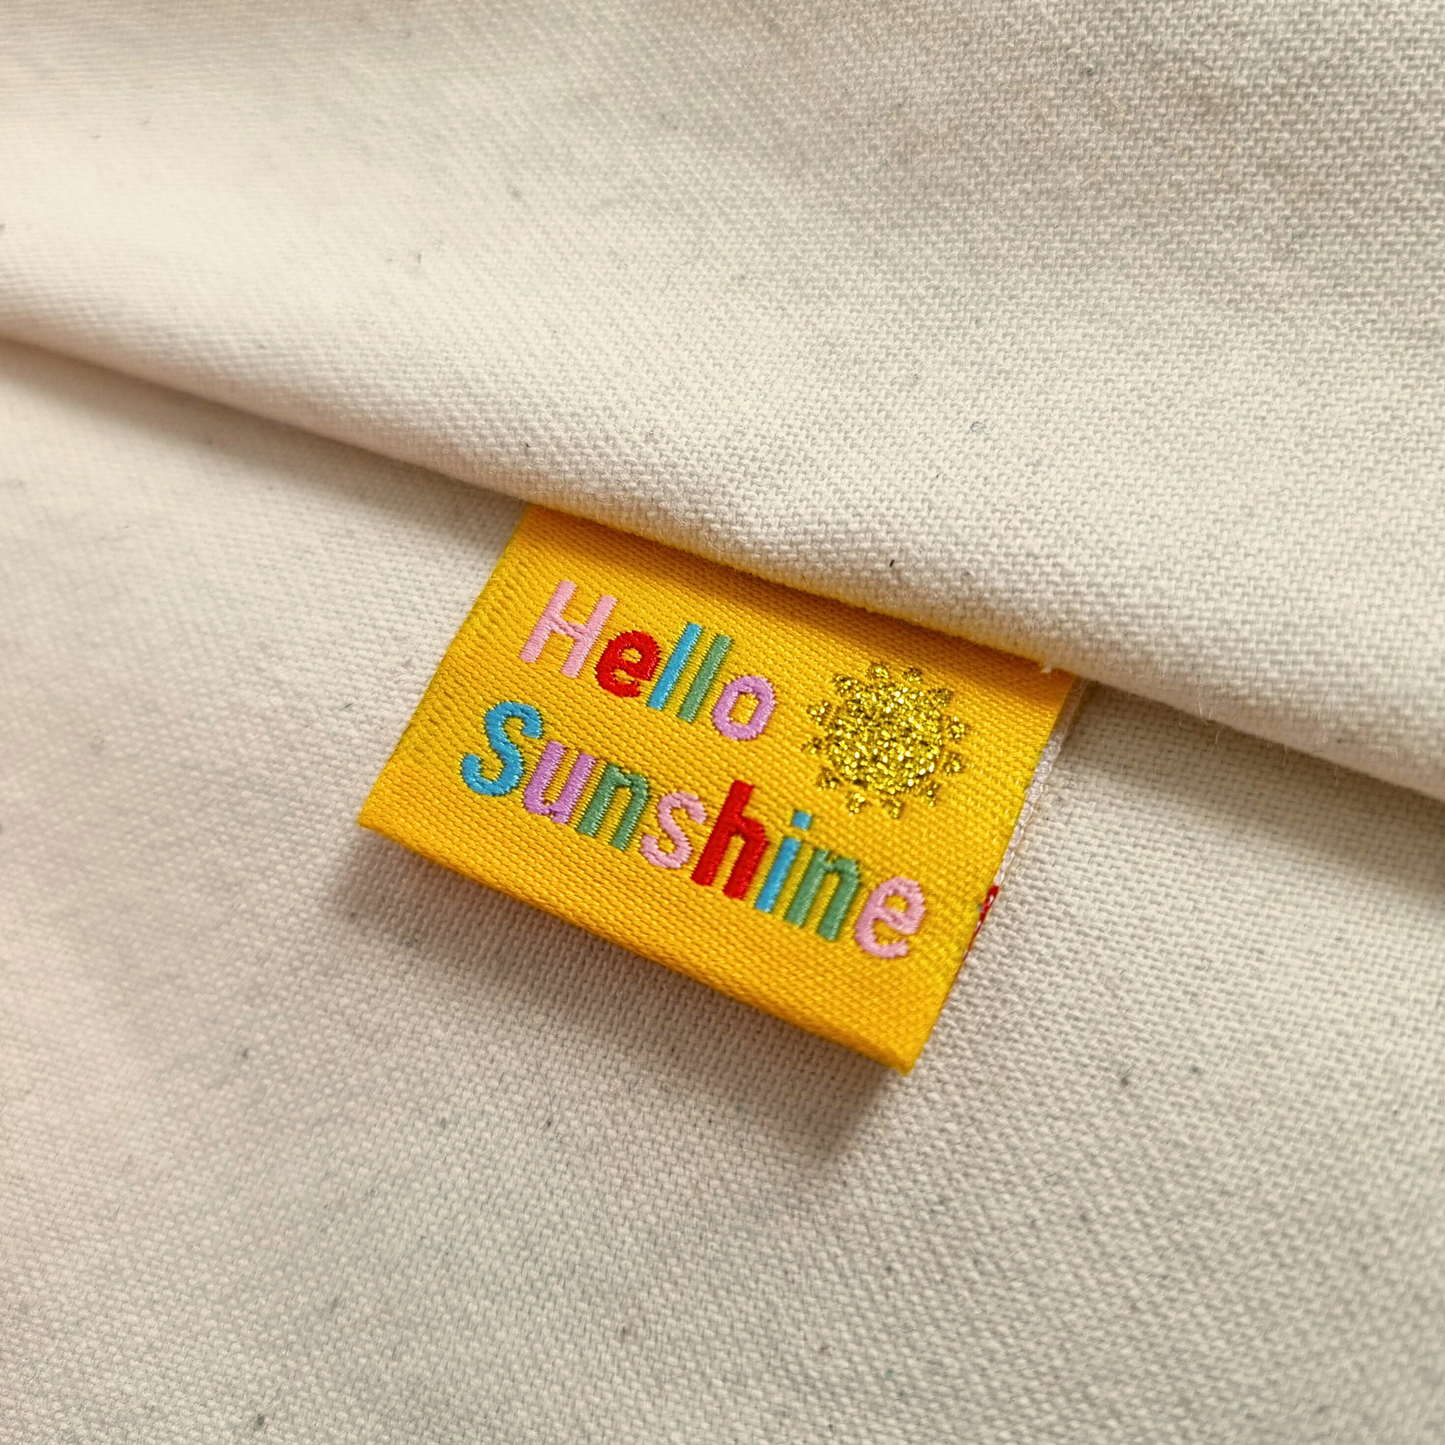 Hello Sunshine | Woven Sew In Labels